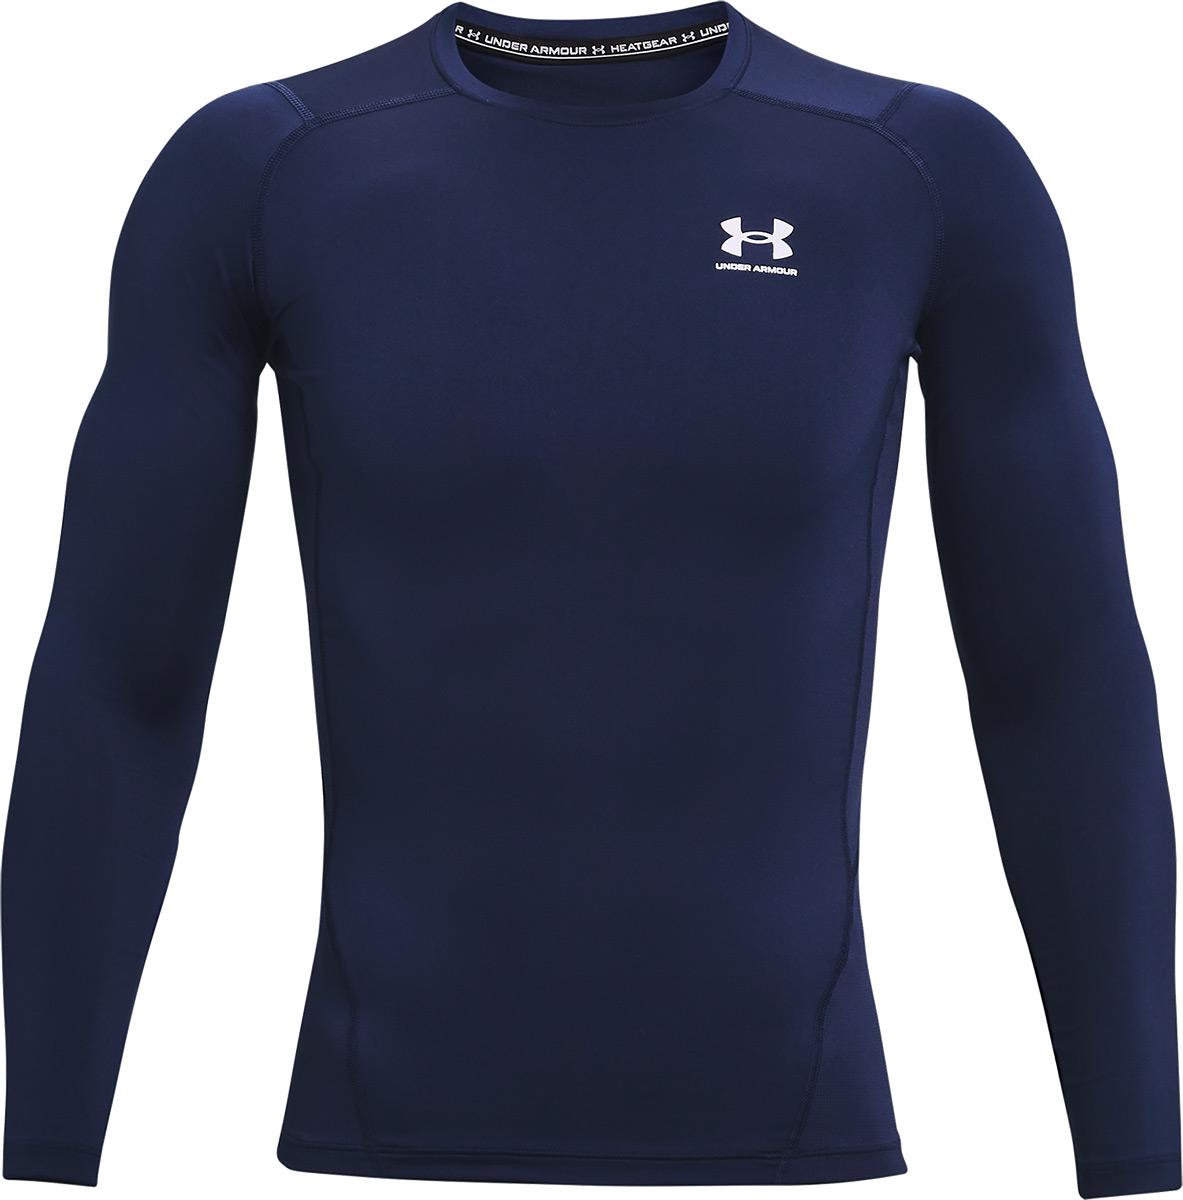 Under Armour Heatgear Armour Long Sleeve Compression Top - Midnight Navy/white